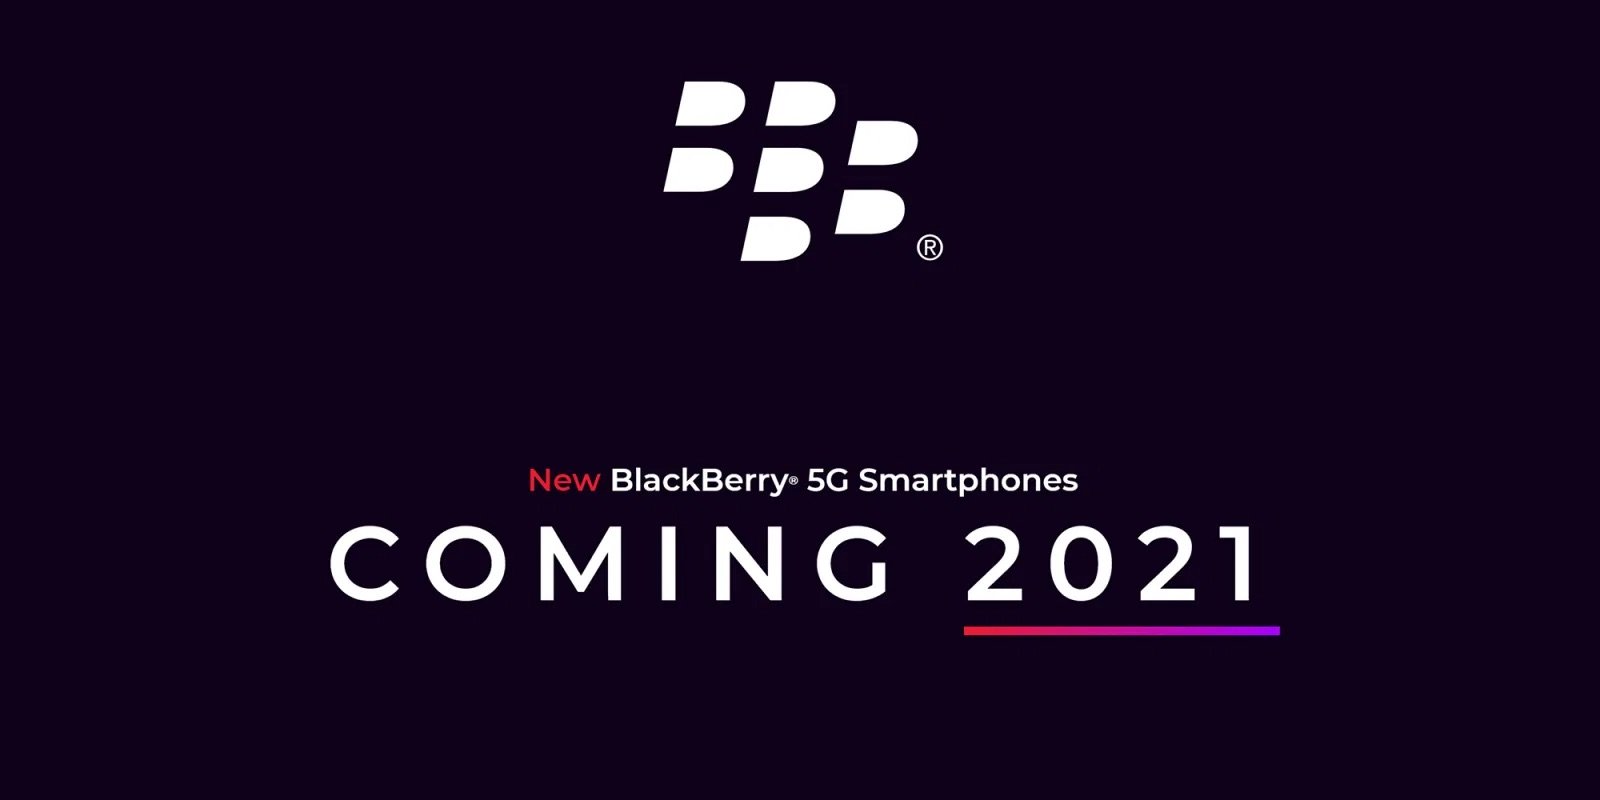 Blackberry Phones Are Coming Back In 2021, With 5G And Physical Keyboard